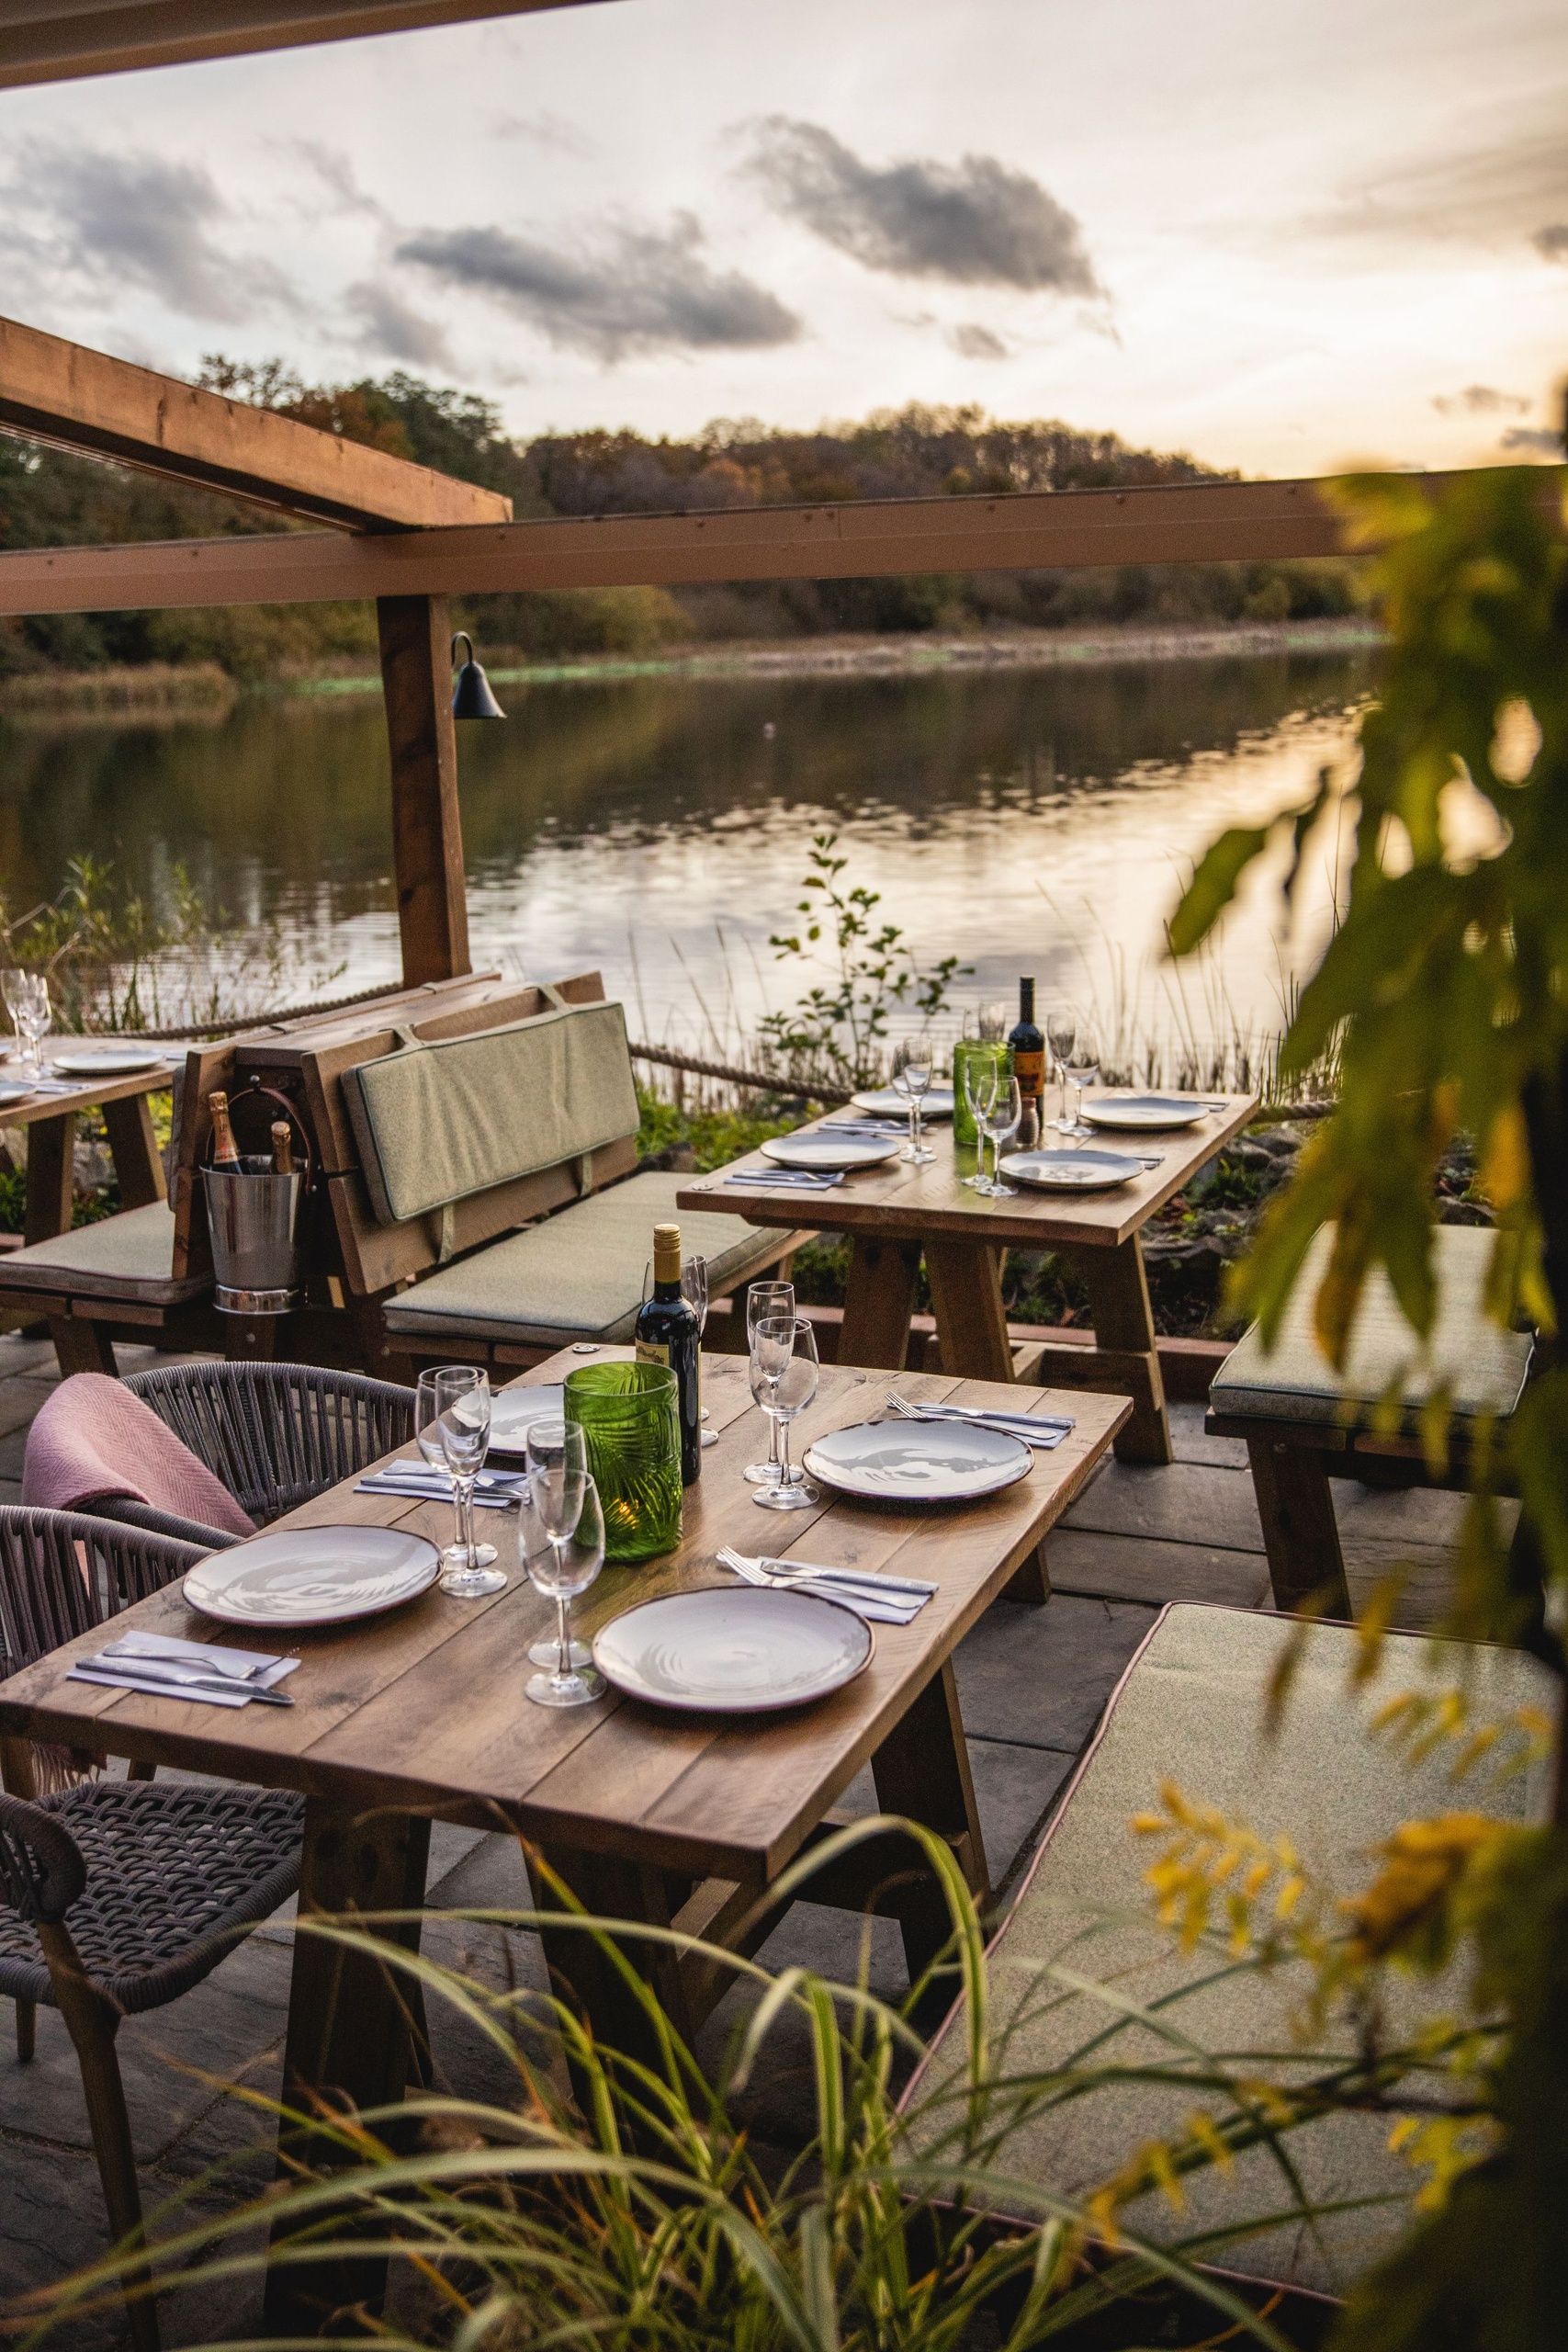 Sunny table setting on lakewide terrace at sunset